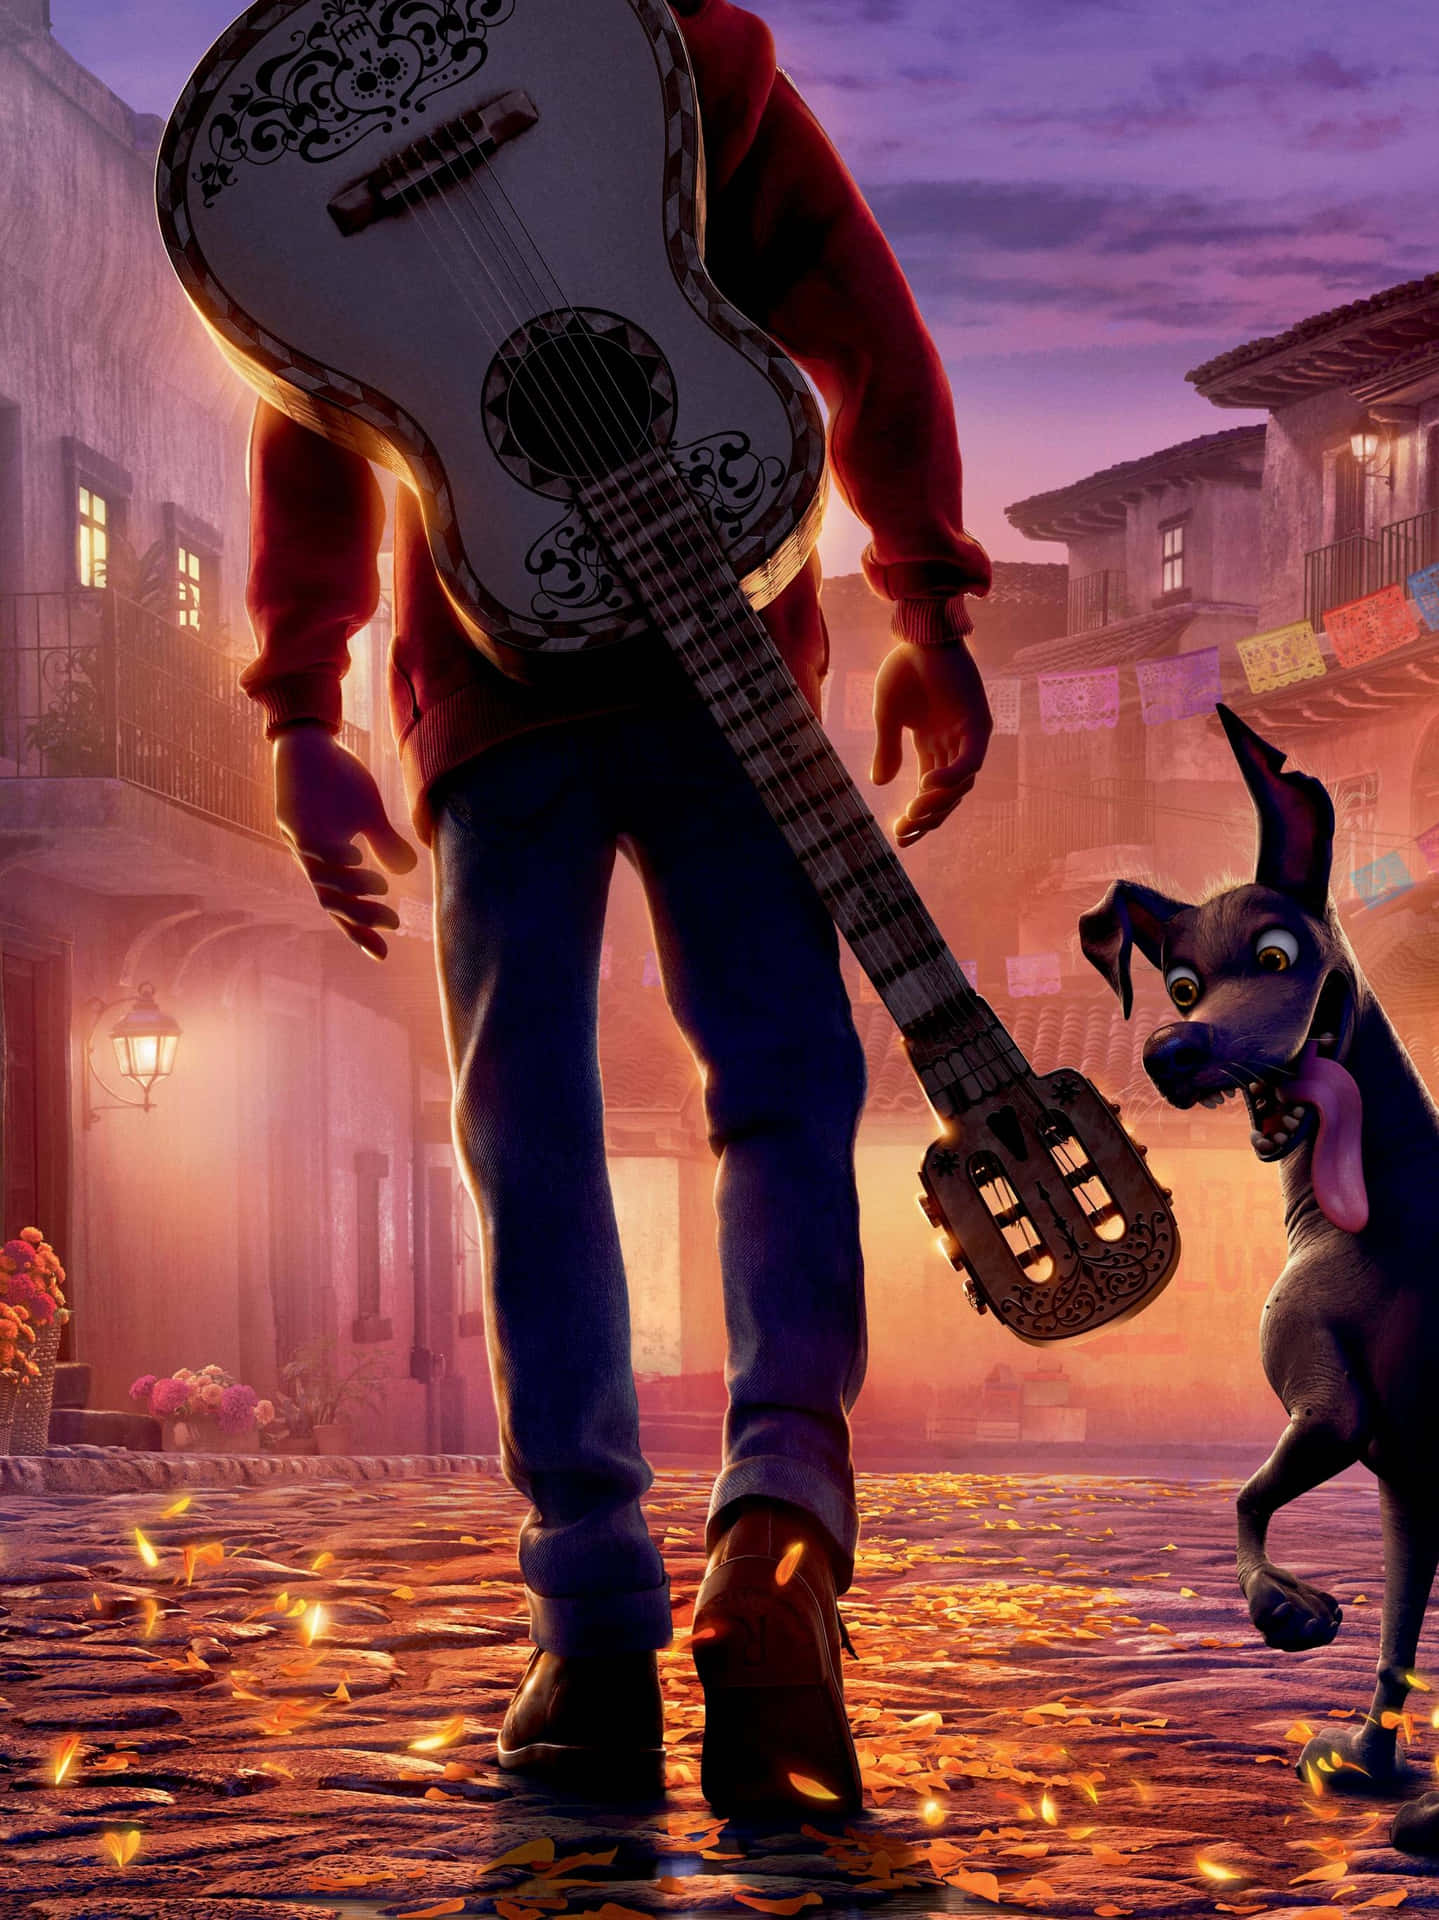 Experience life's journey with the vibrant colors of Pixar's Coco